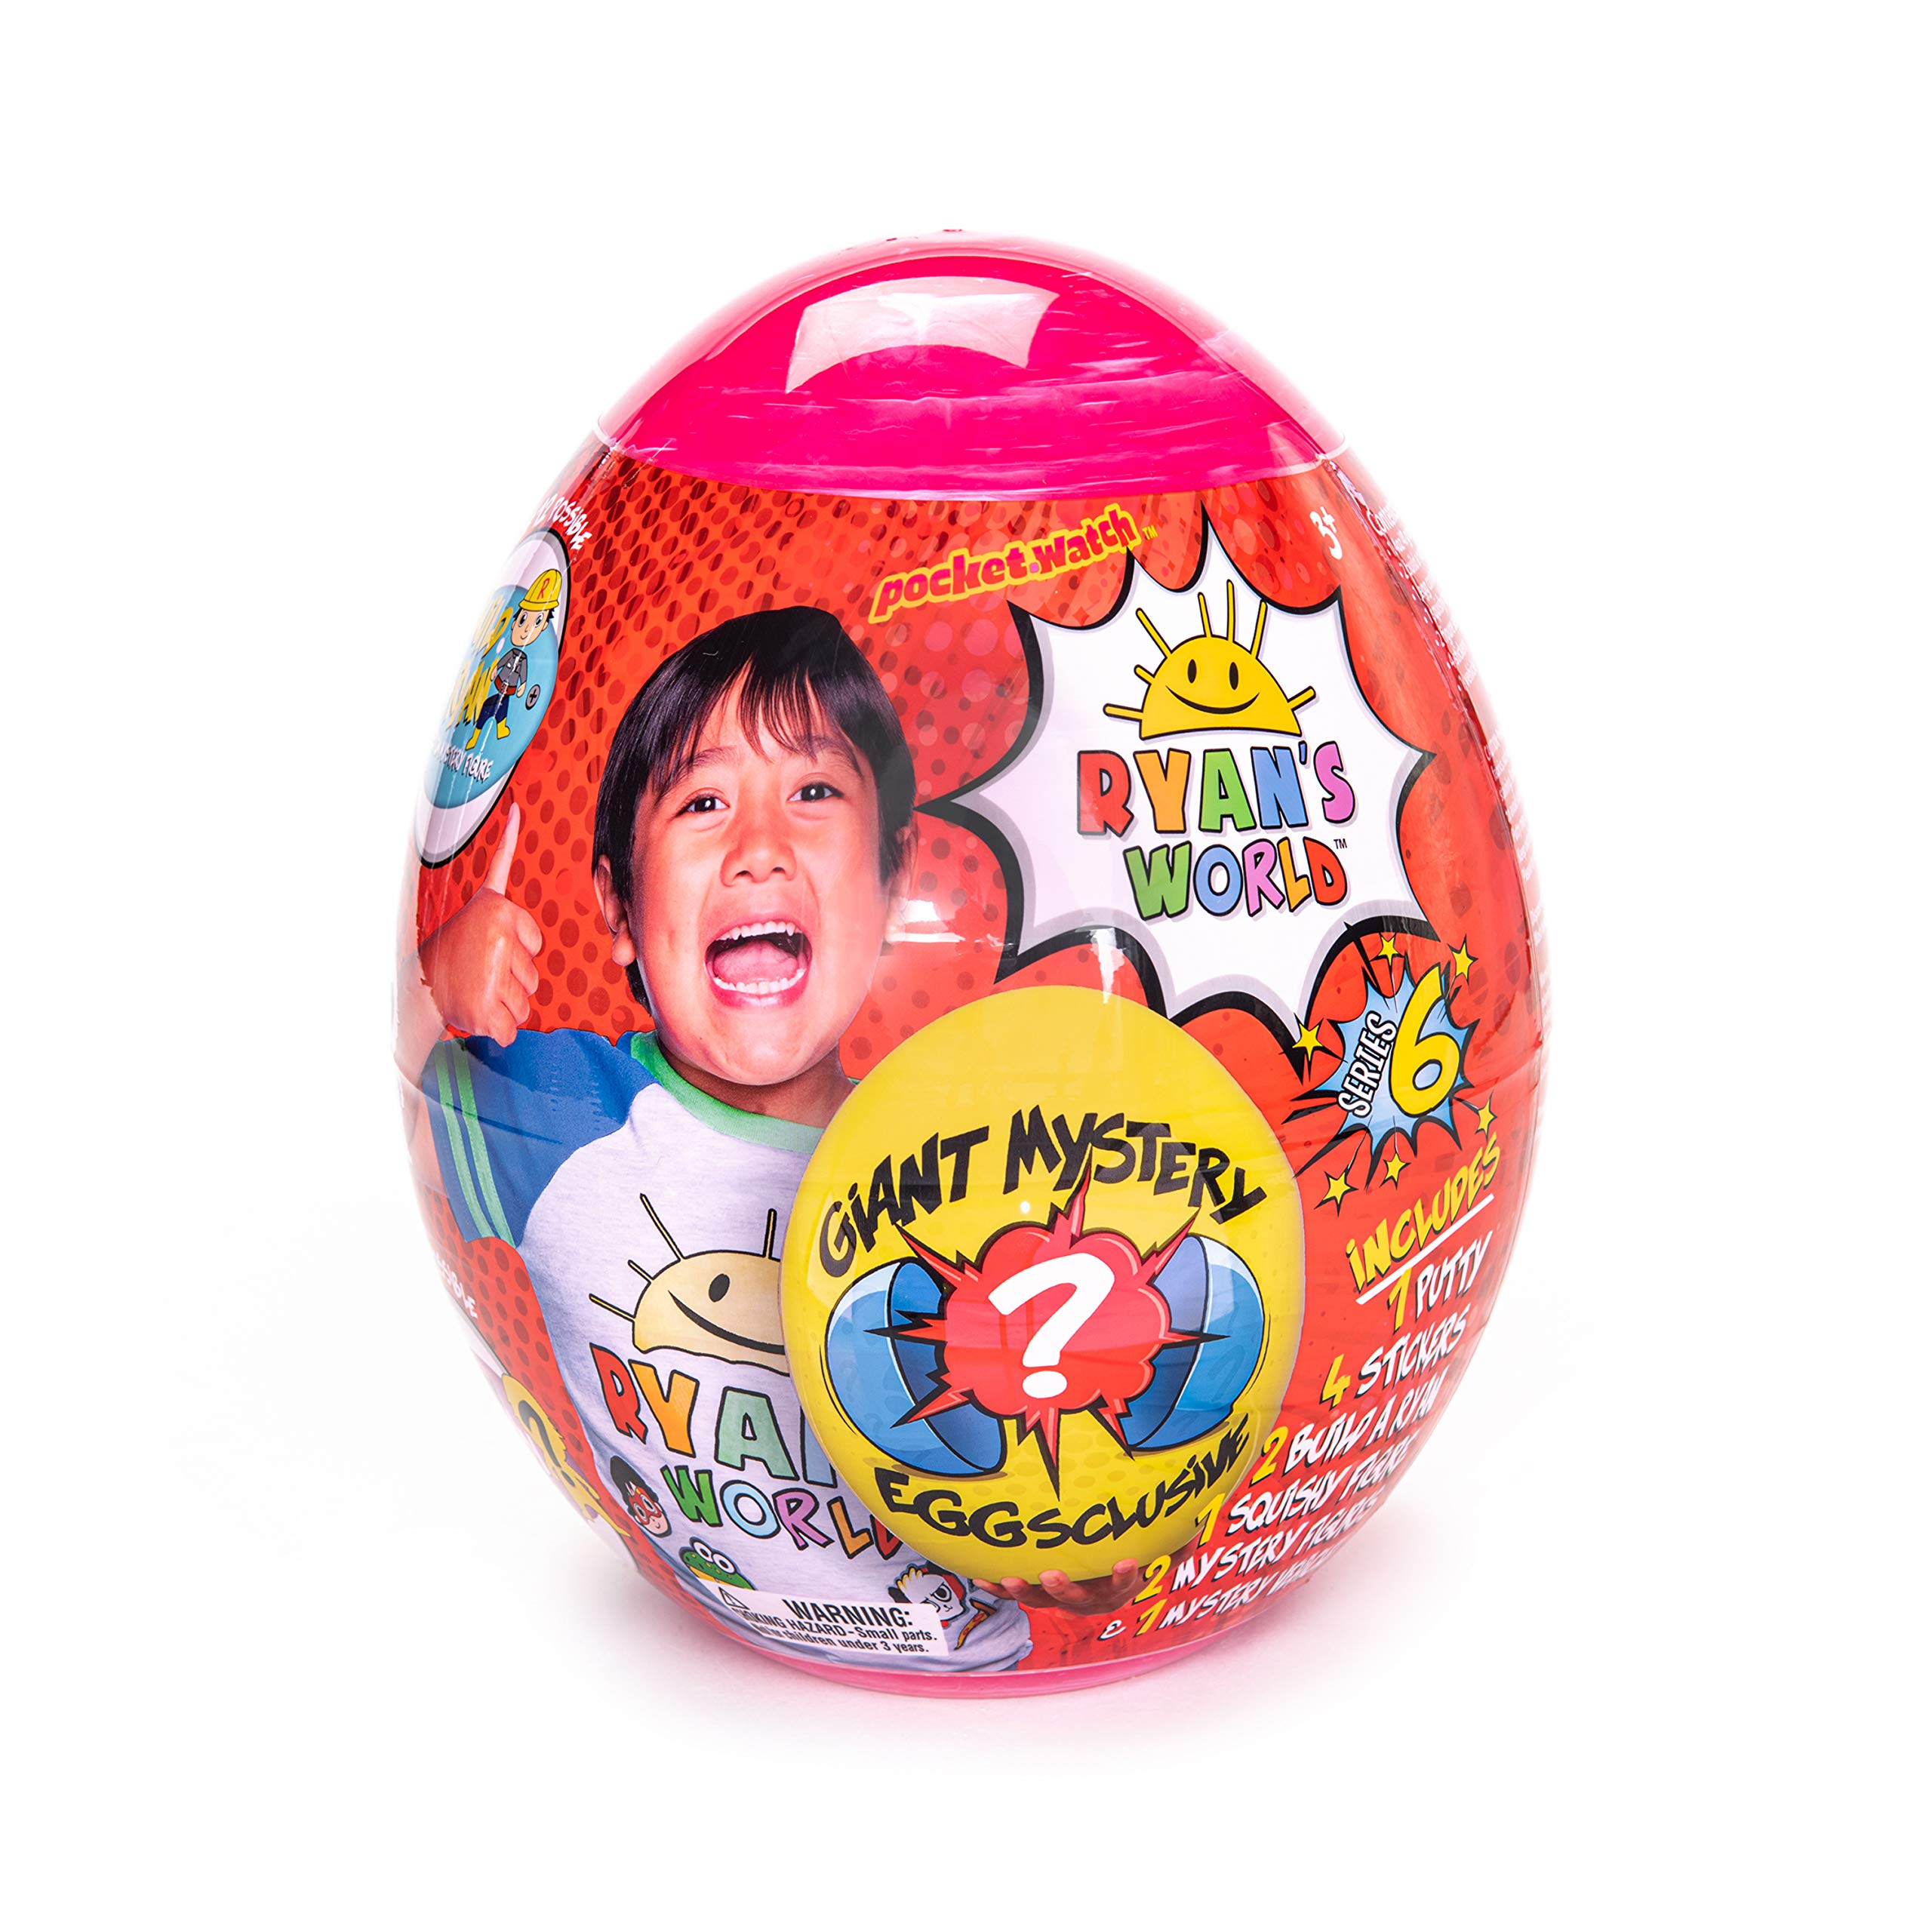 RYAN'S WORLD Giant Mystery Egg Series 6, Filled with Surprises, 1 of 3 Color Variety New Vehicles, 2 Ultra-Rare Figures, 2 Build-a-Ryan Figures, Special Putty, 1 Squishy and Stickers, Toy for Kids